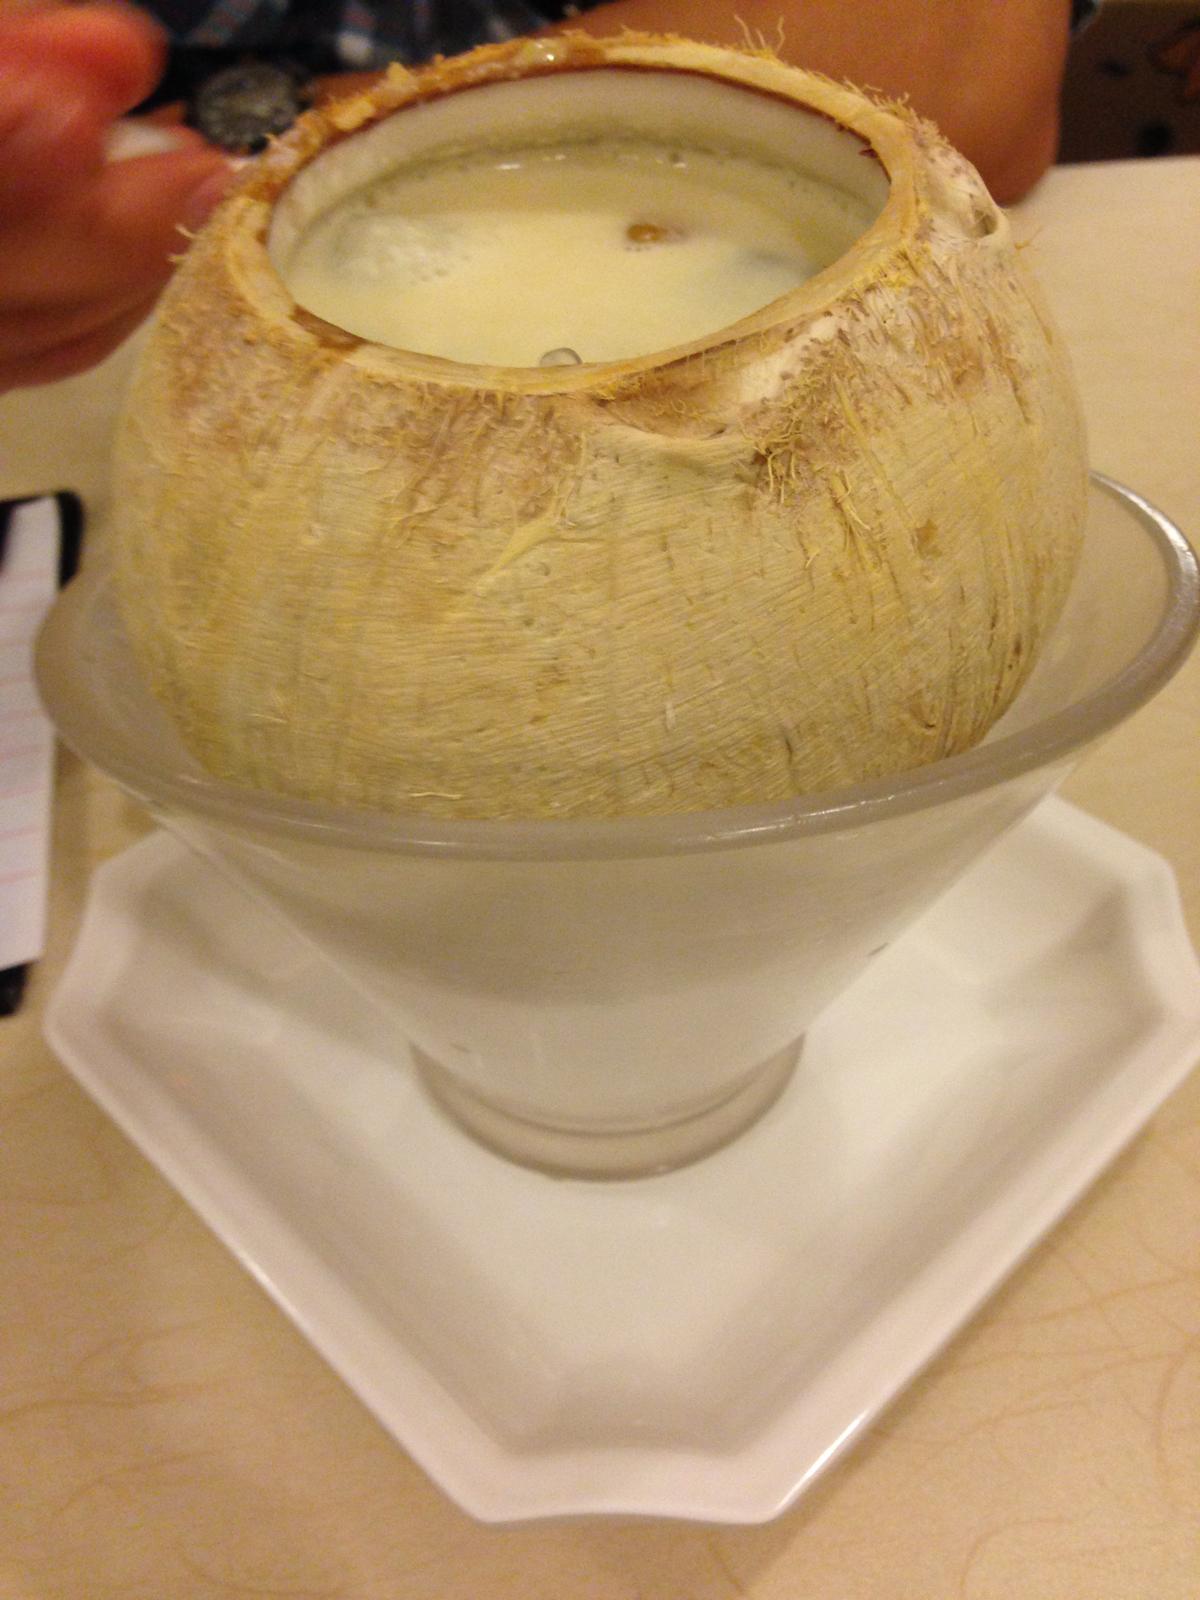 This was the dessert I ordered. It's served in a coconut! How cool is that?